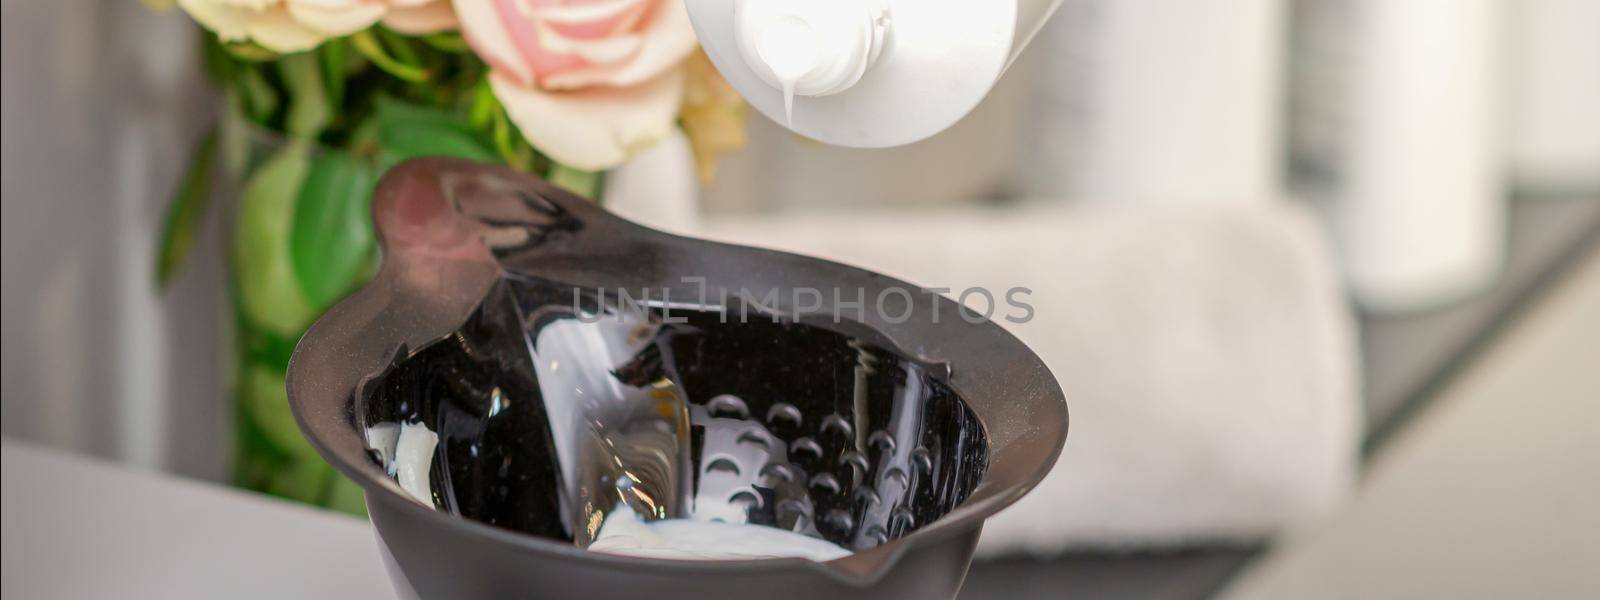 Hairdresser's hand mix hair dye in a black bowl in a beauty salon